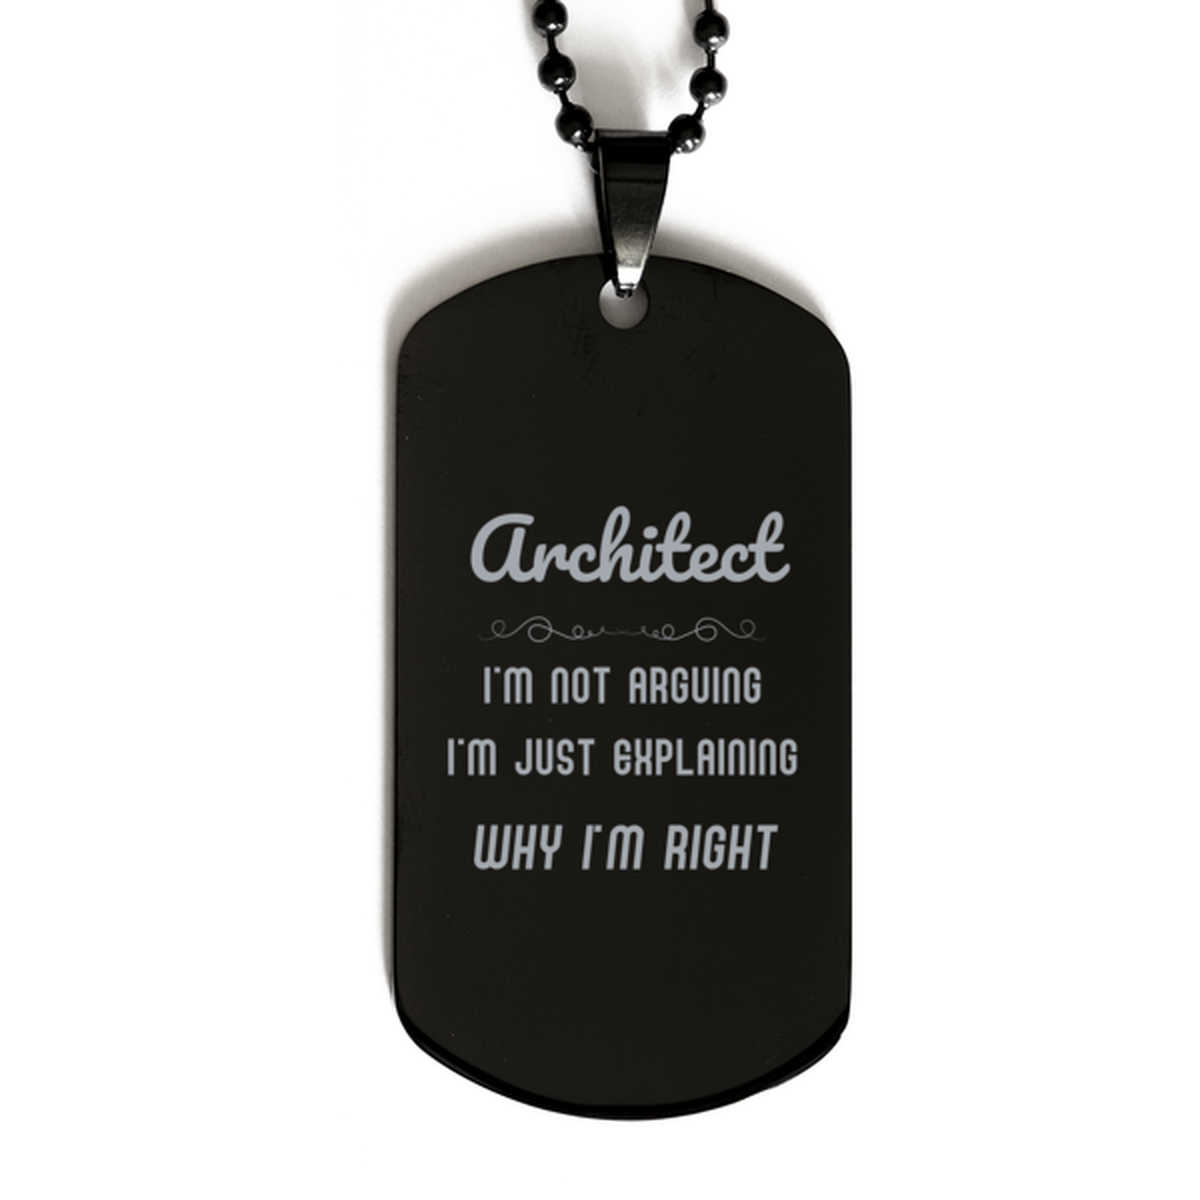 Architect I'm not Arguing. I'm Just Explaining Why I'm RIGHT Black Dog Tag, Funny Saying Quote Architect Gifts For Architect Graduation Birthday Christmas Gifts for Men Women Coworker